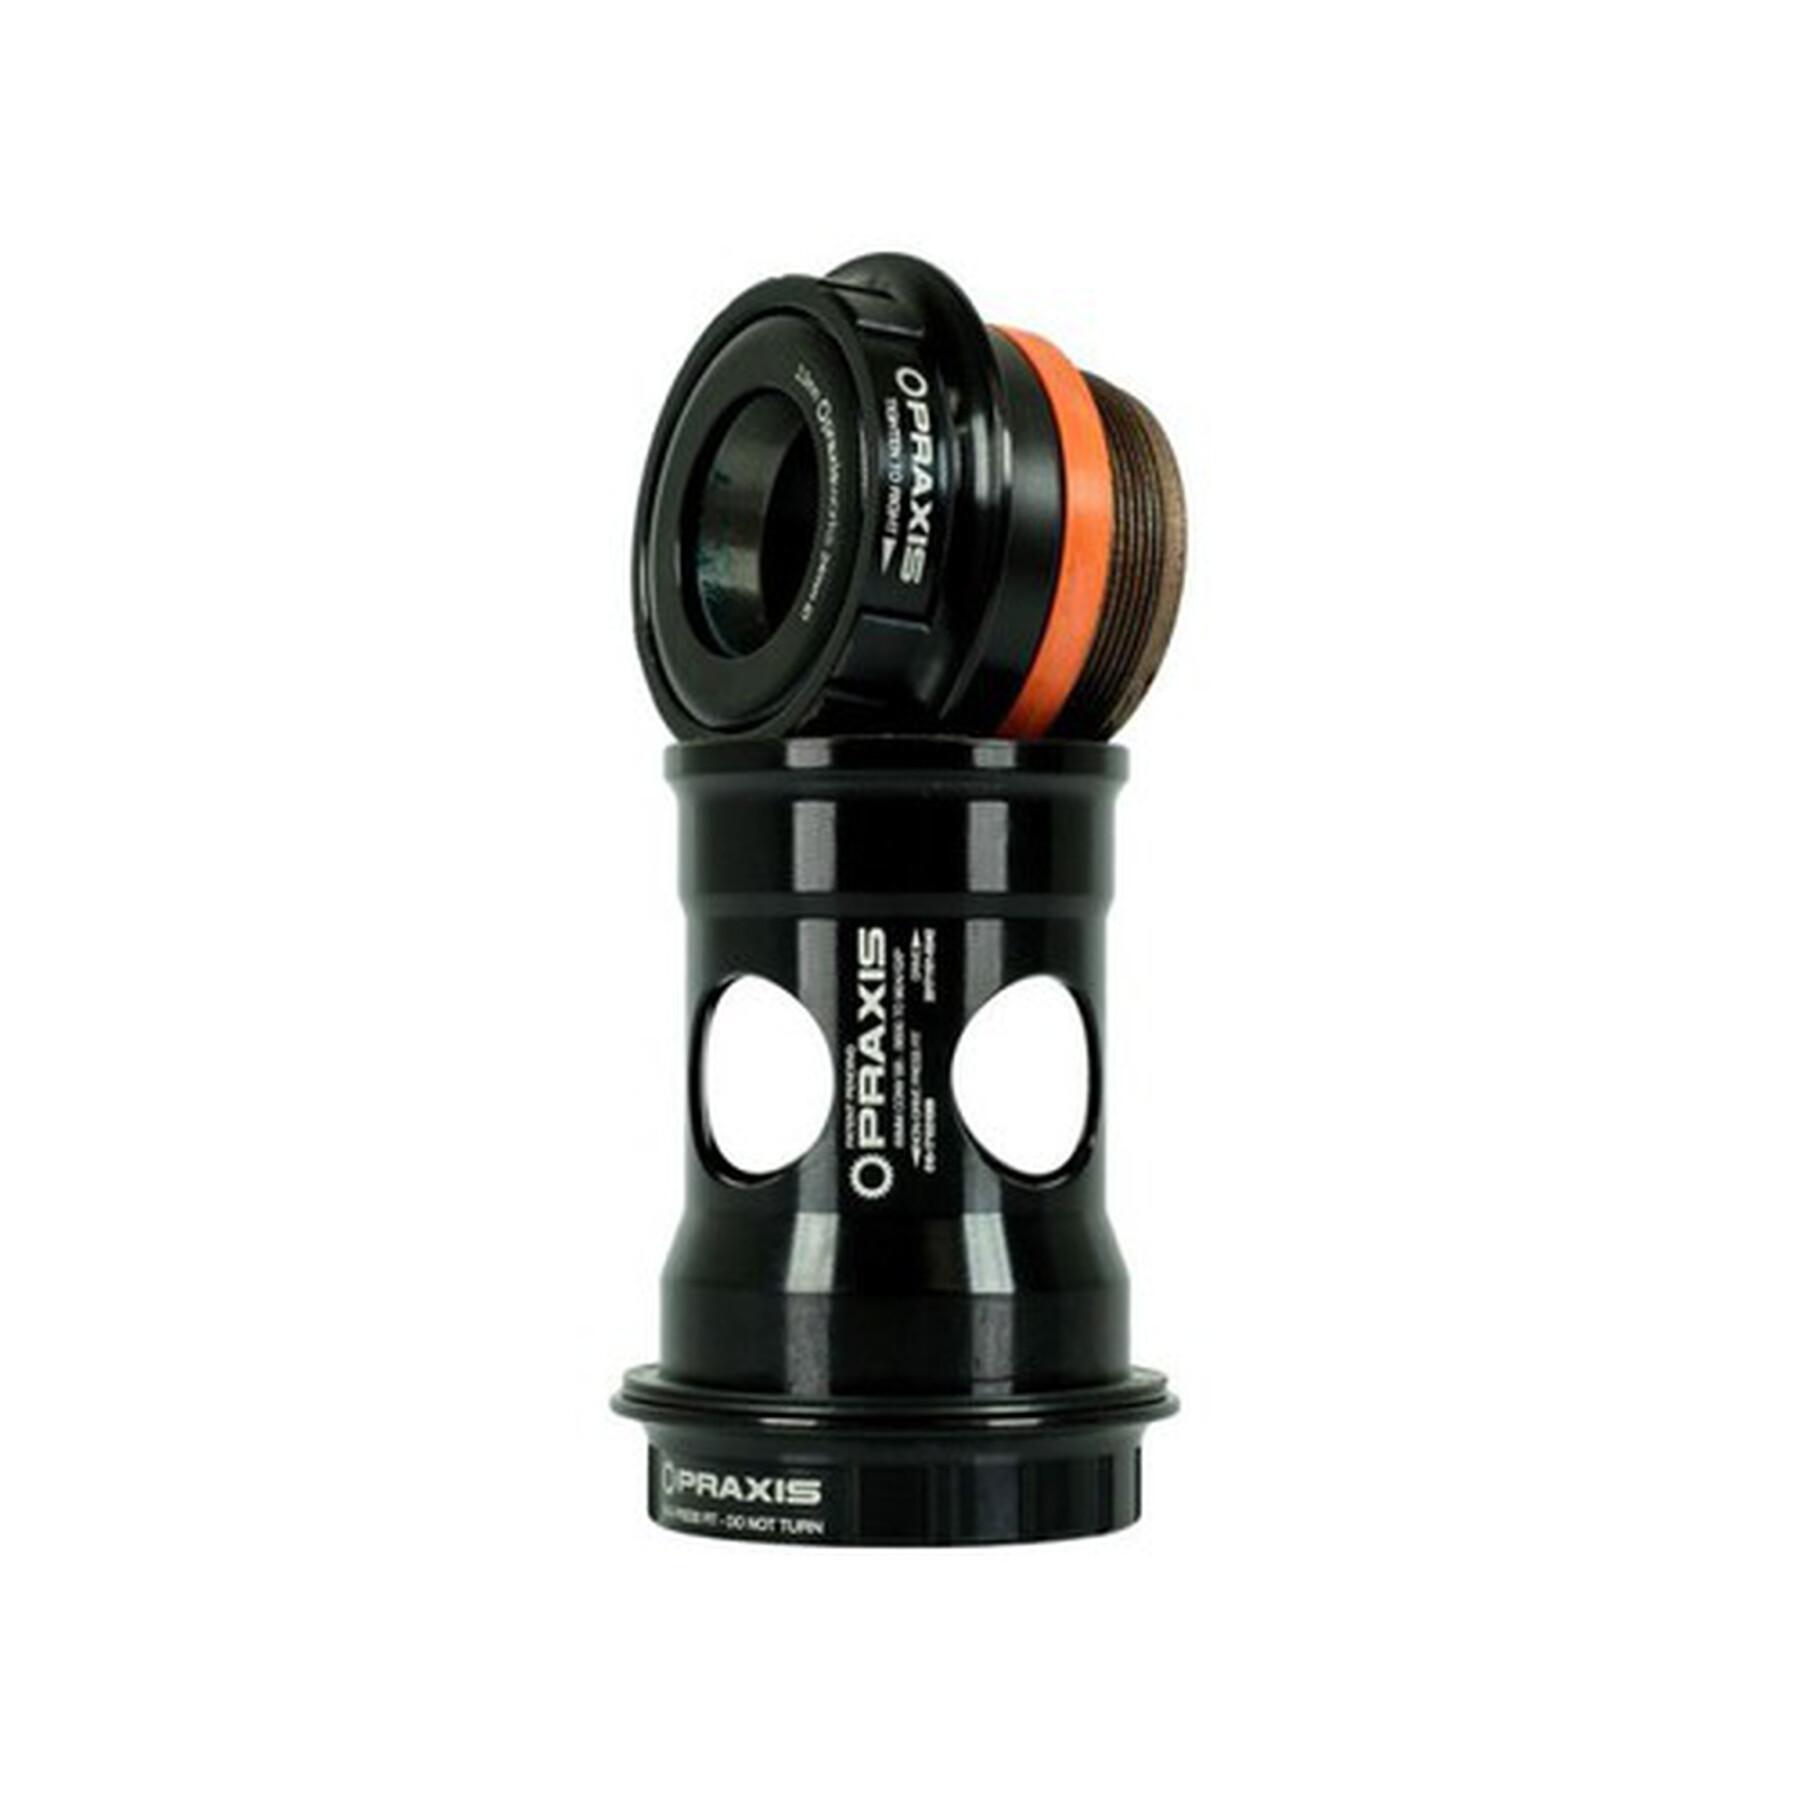 Suporte inferior Praxis ConvBB30-PF30 Sram GPX Isis2 R-Collet